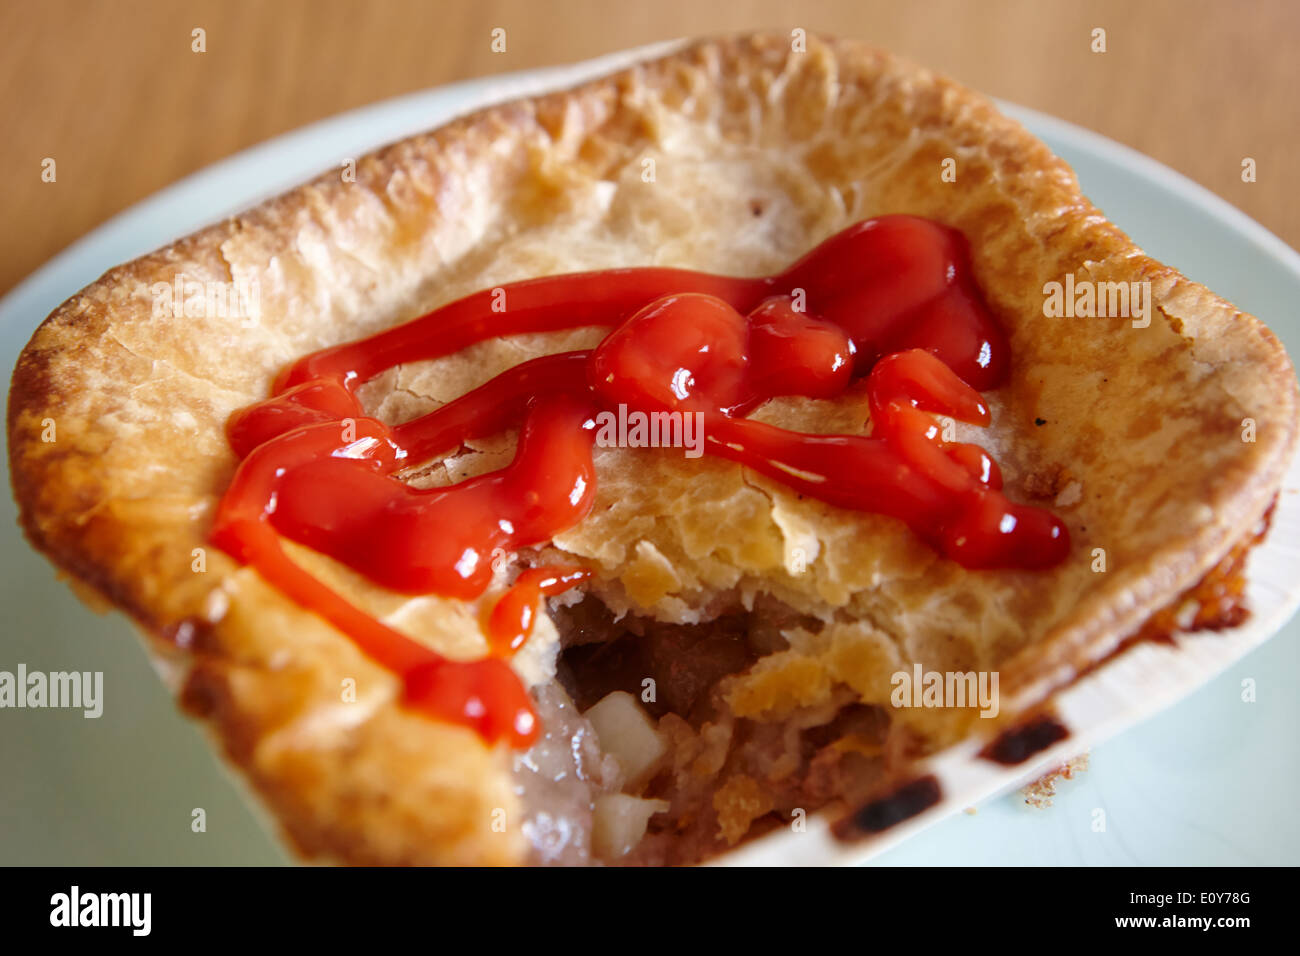 baked scouse pie in carton covered in tomato sauce Stock Photo